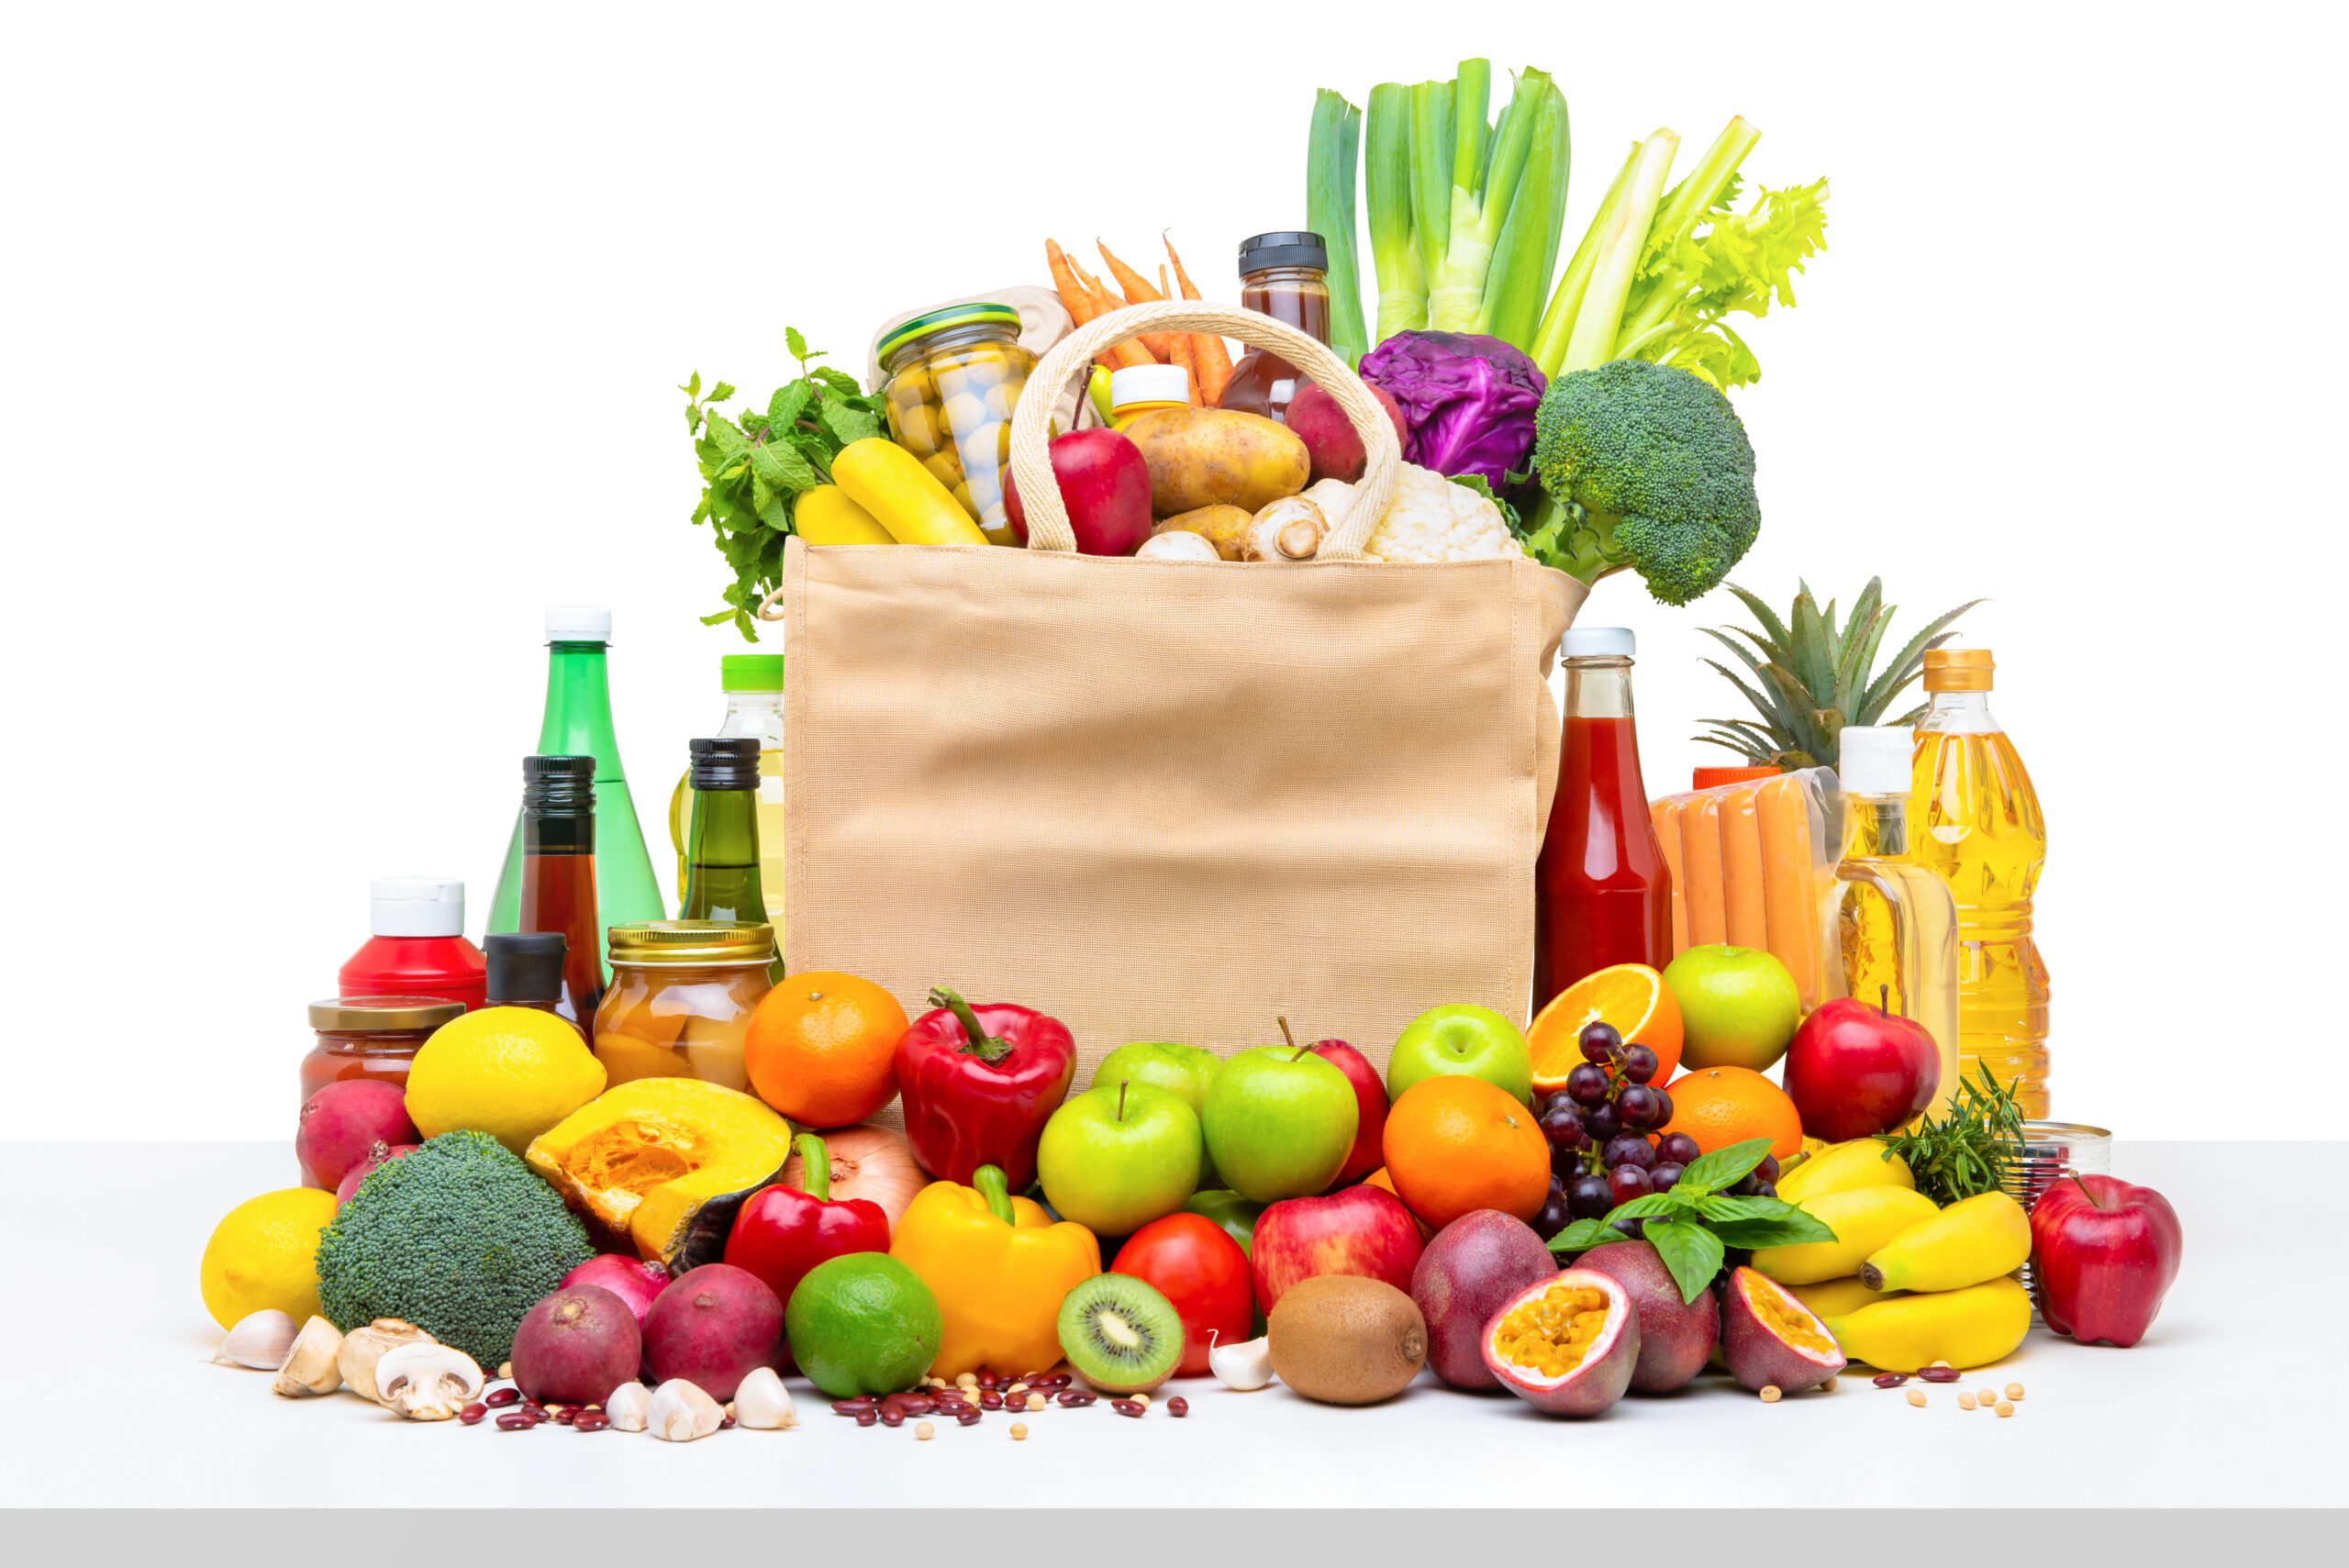 Shopping bag full of fresh fruits and vegetables with assorted i